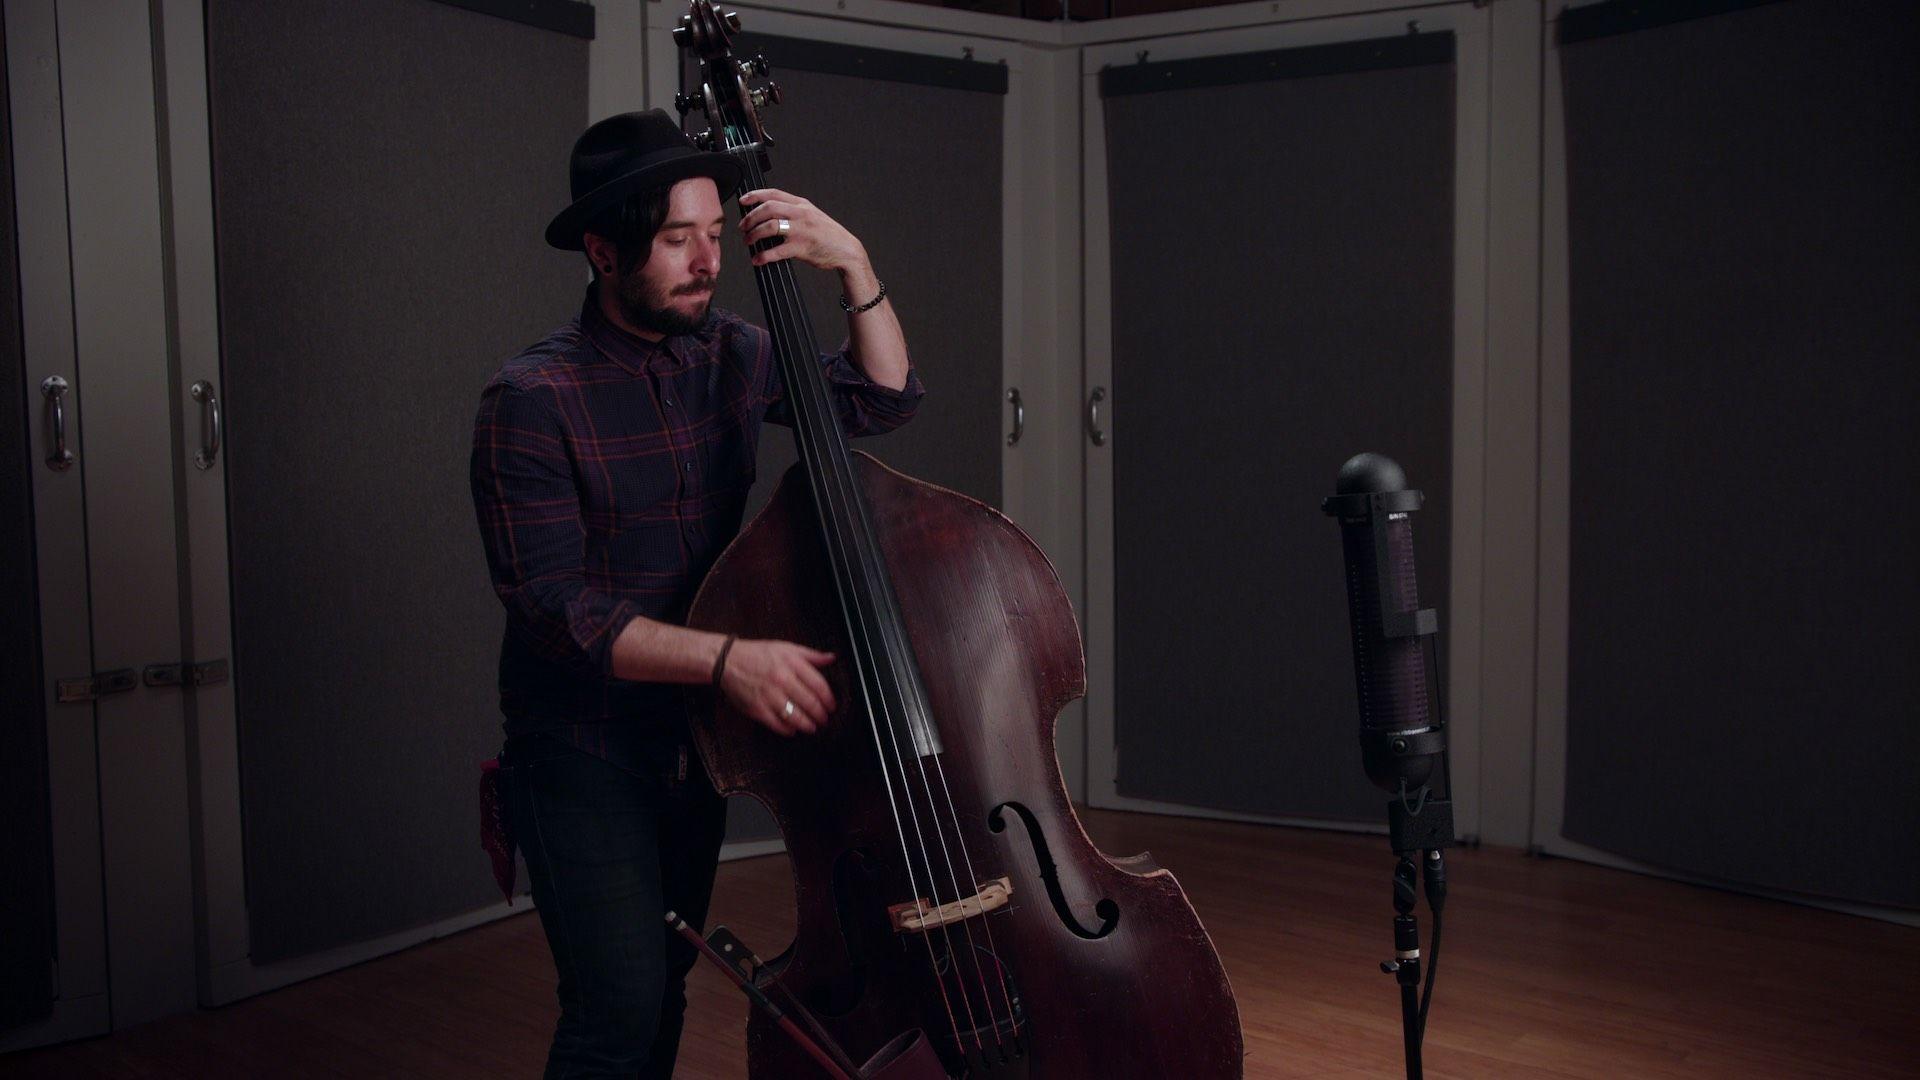 How To Record Double Bass With the R88. AEA Ribbon Mics & Preamps